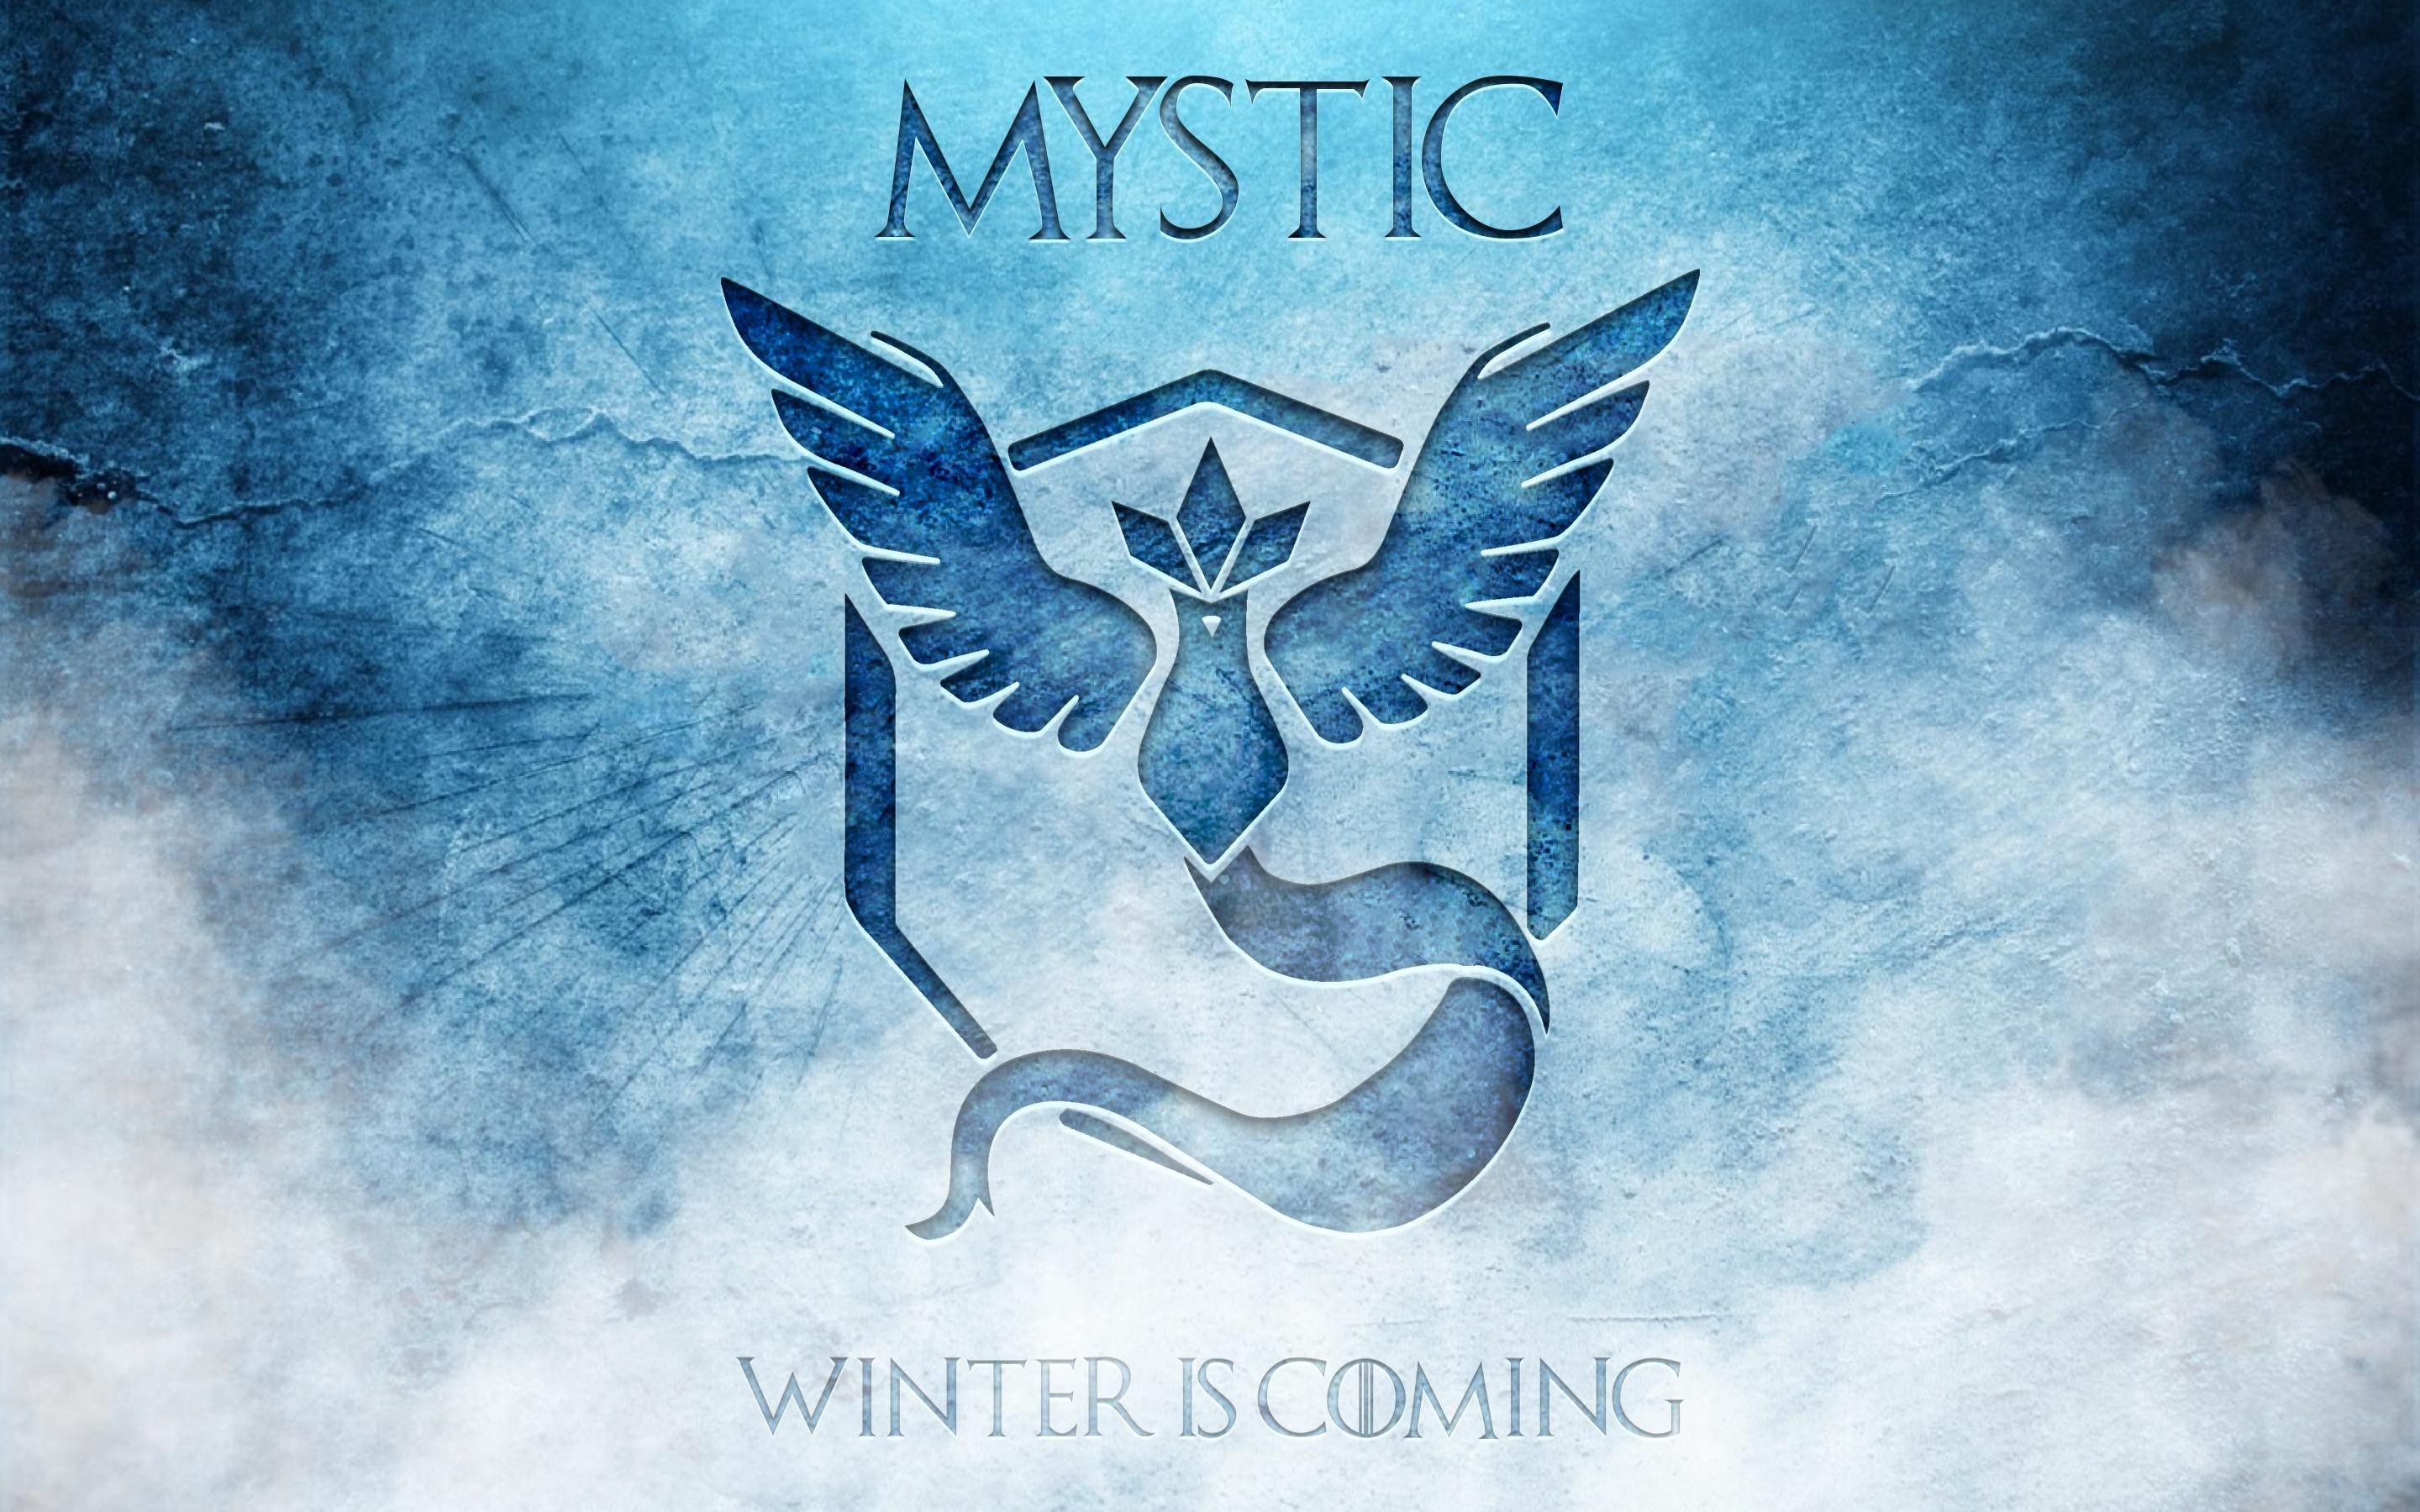 Winter is Coming! Game of Thrones Wallpaper for Team Mystic